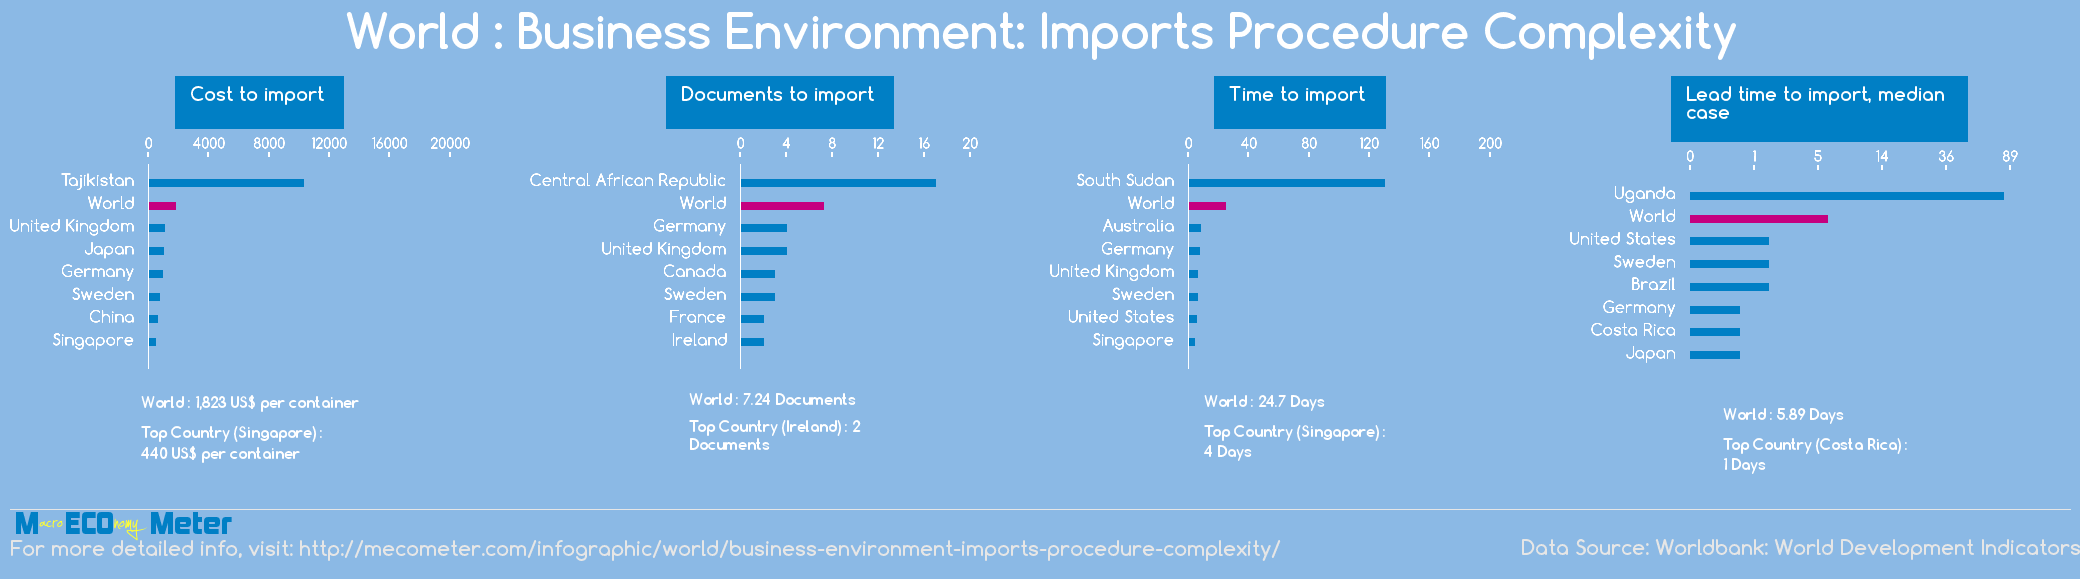 World : Business Environment: Imports Procedure Complexity